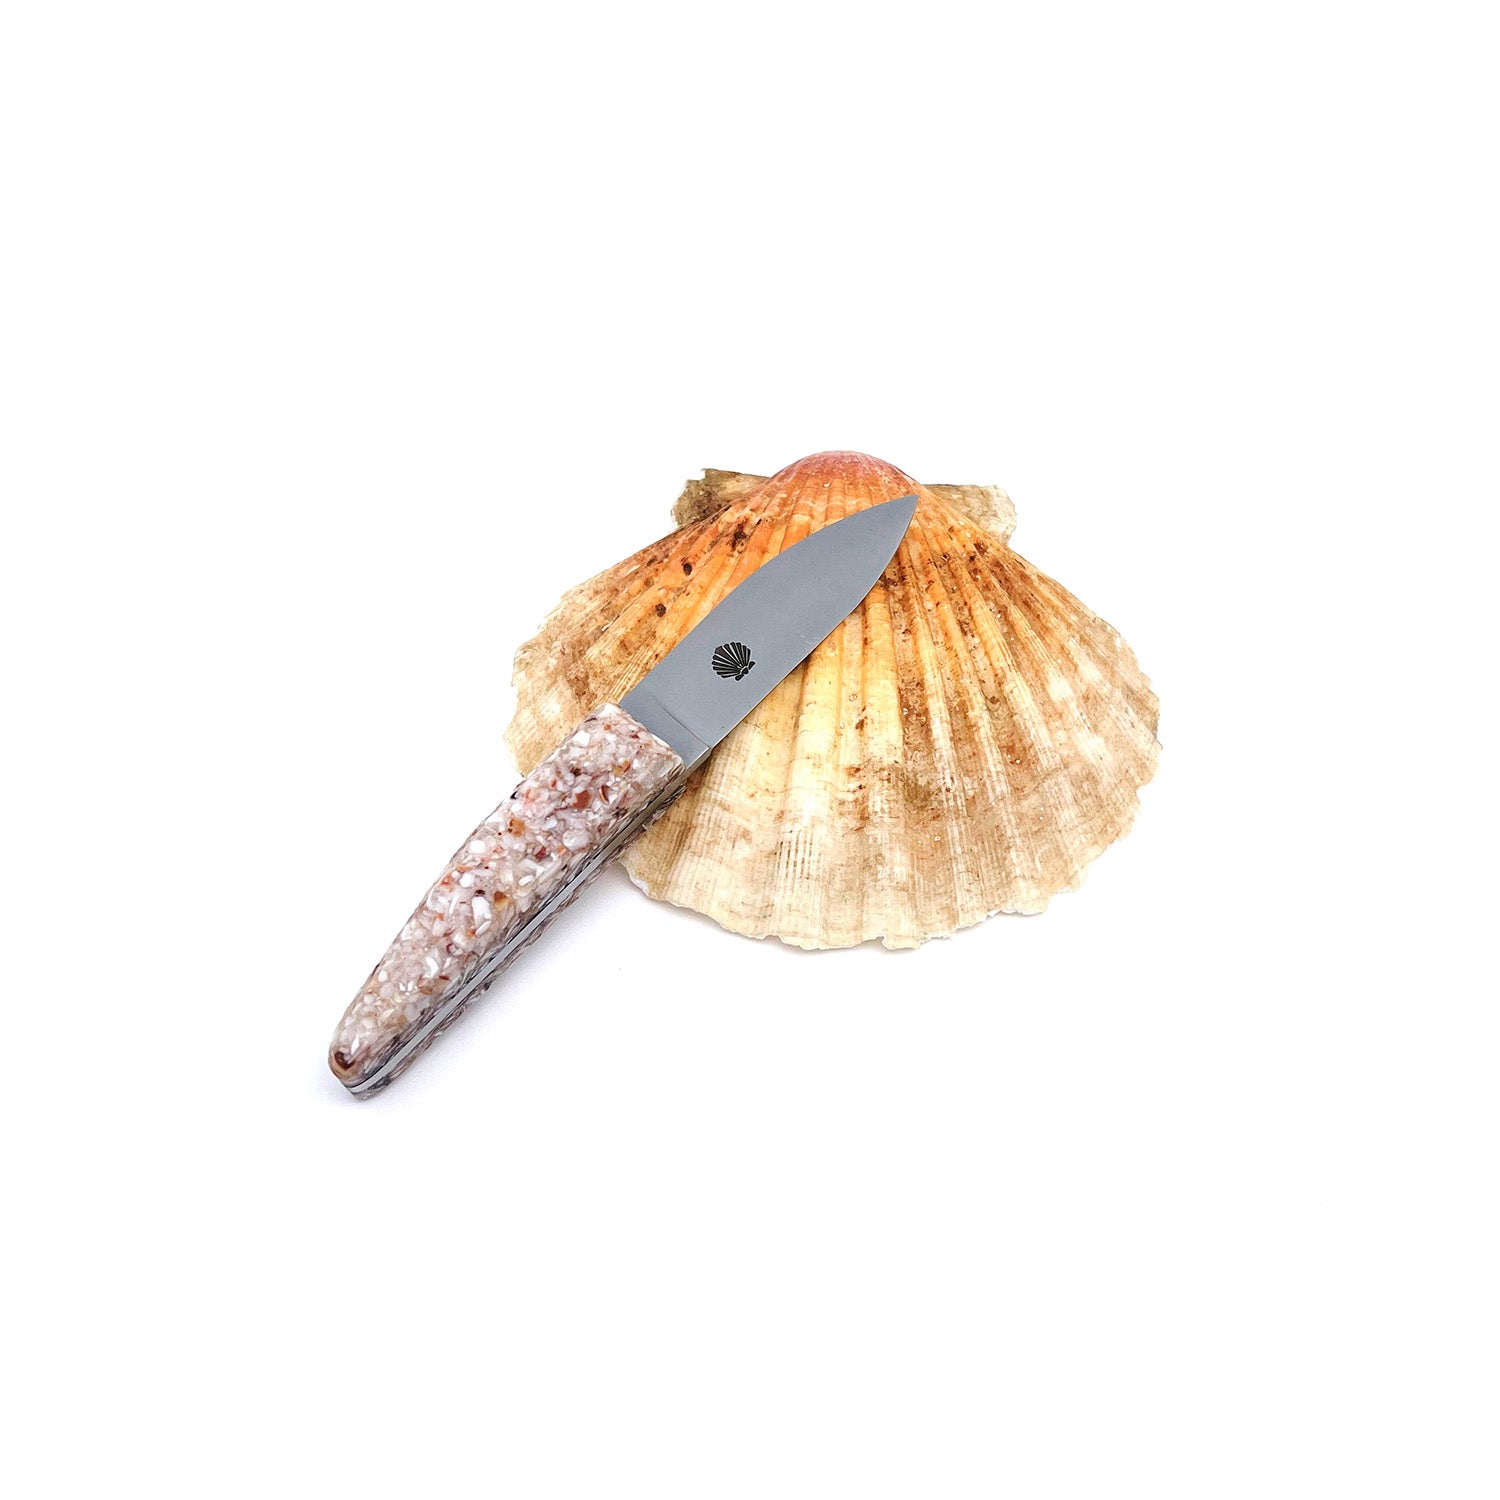 Small oyster knife with a handle made from recycled scallop shells